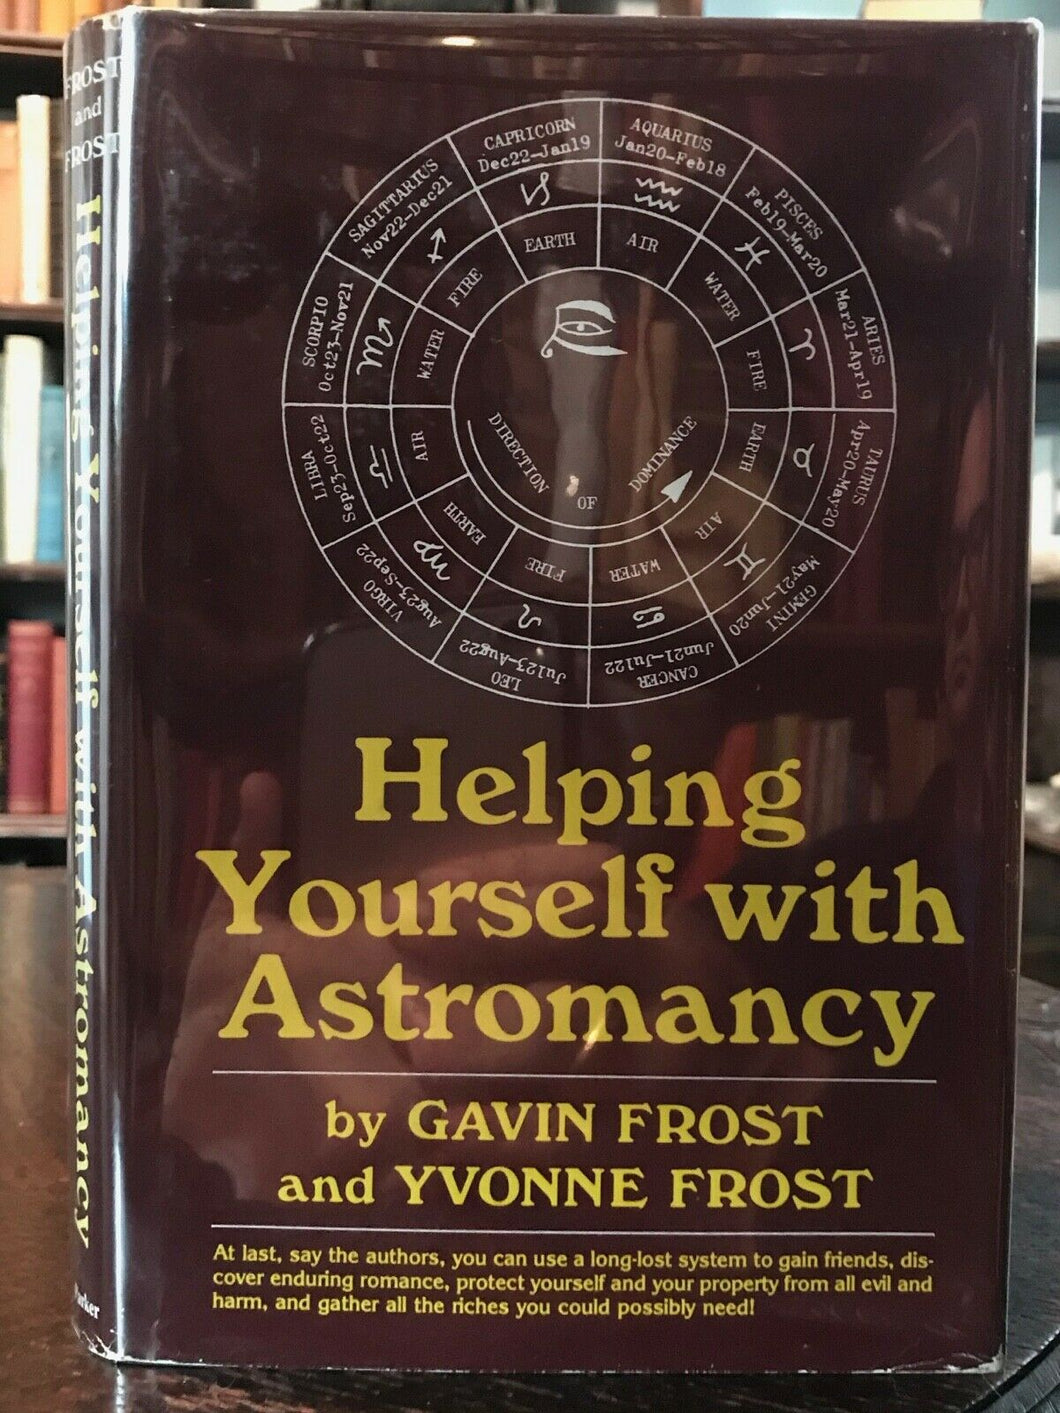 HELPING YOURSELF WITH ASTROMANCY - Gavin & Yvonne Frost - 1980, GRIMOIRE MAGICK